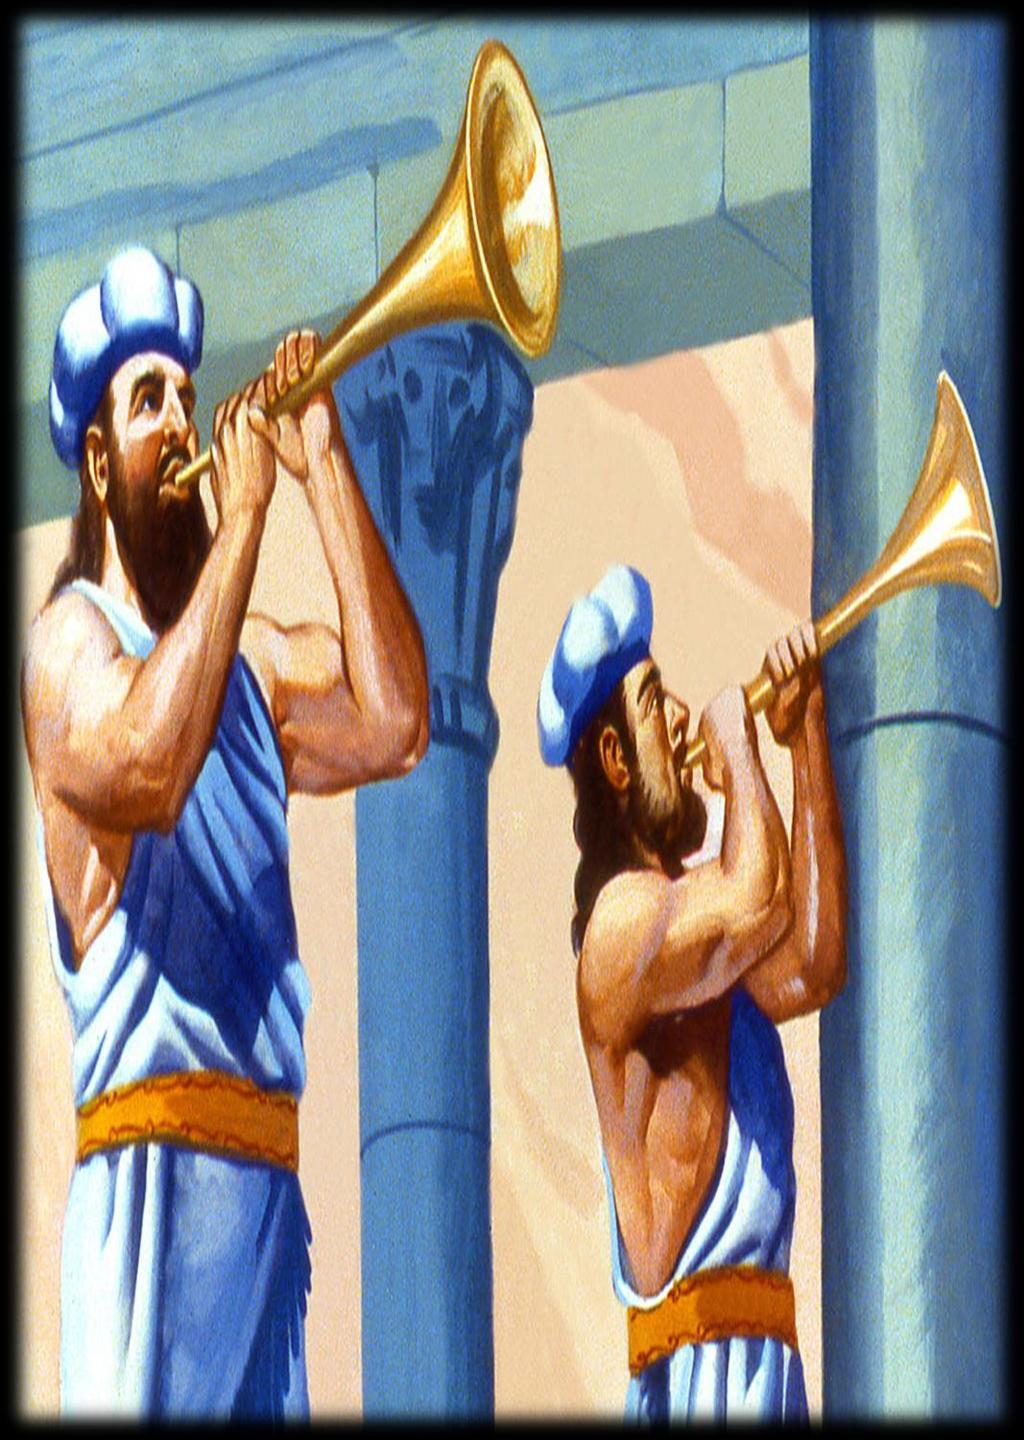 Nebuchadnezzar s grand idolatry plan was accompanied by an orchestra of music that provided